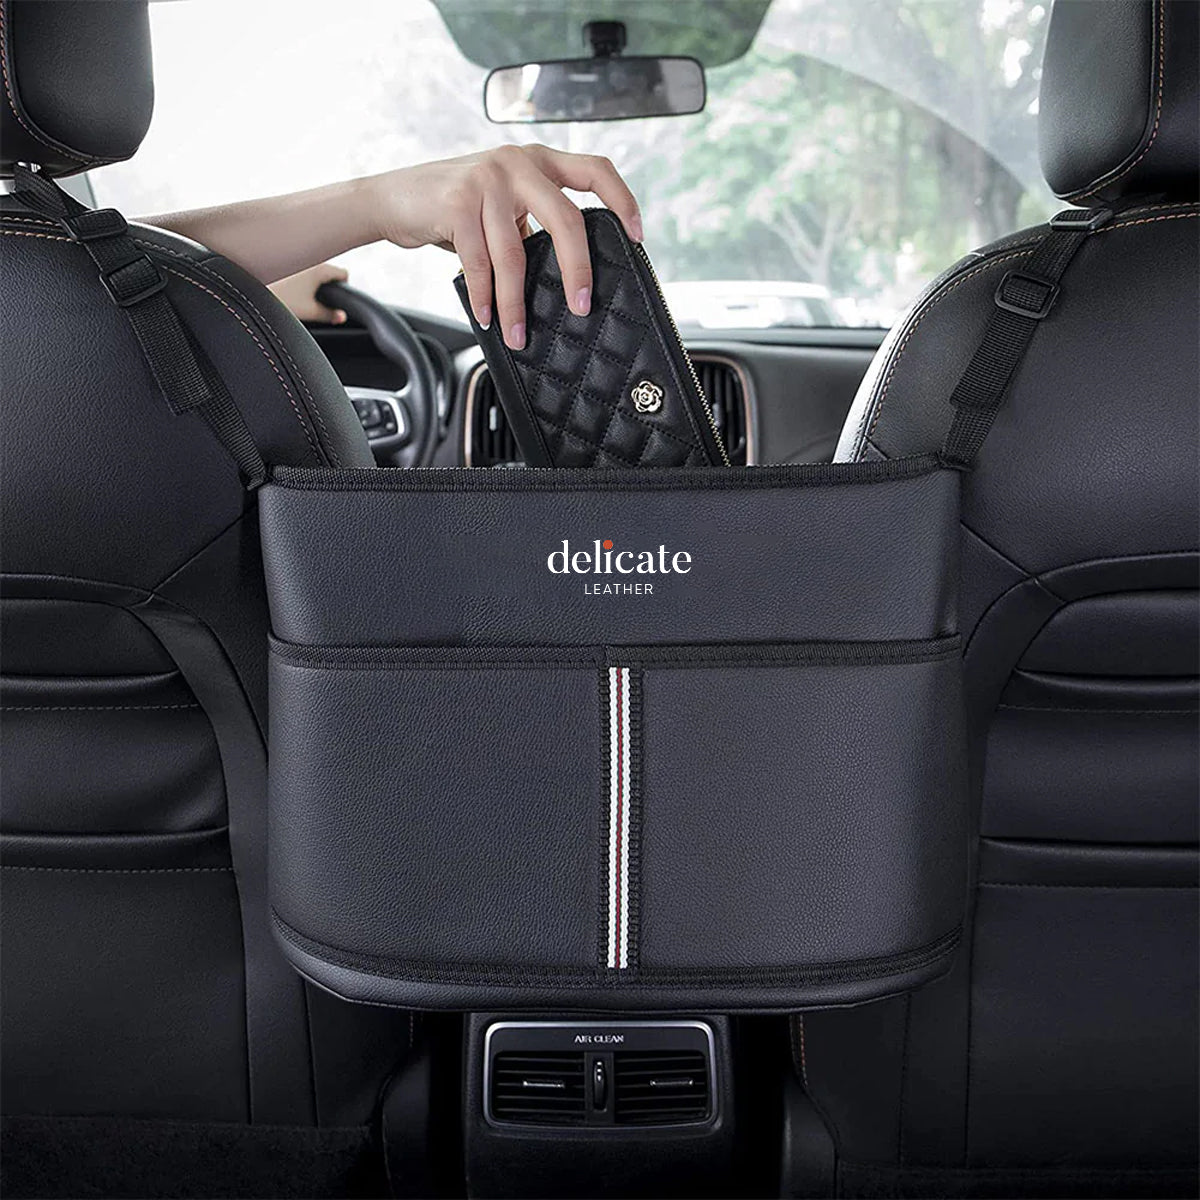 Alfa Romeo Car Purse Holder: Keep Your Bag Secure and Accessible on the Go